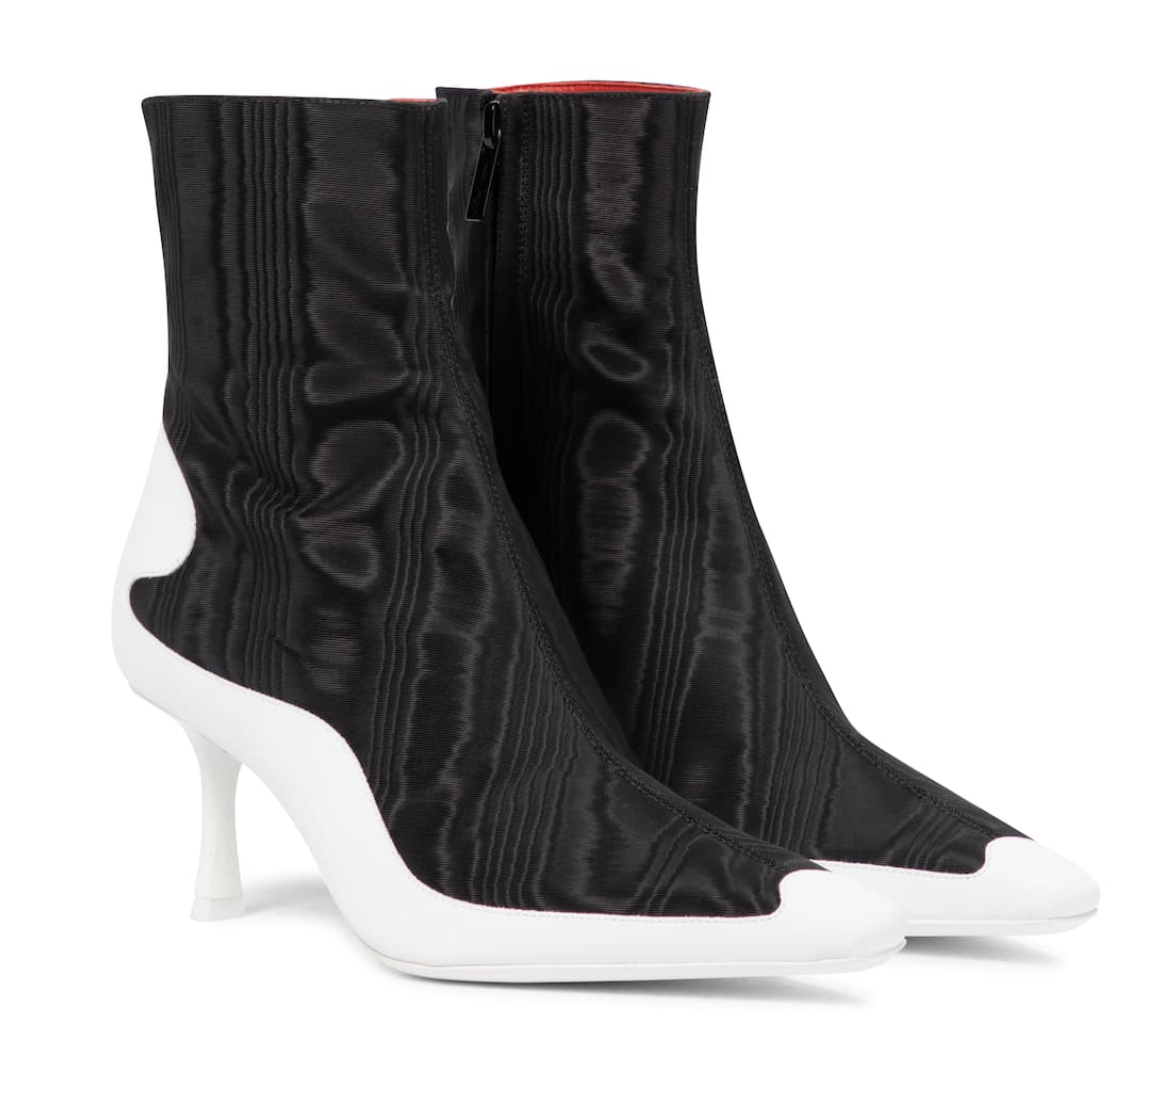 EXCLUSIVE JIMMY CHOO Exclusive to Mytheresa – x Marine Serre moiré ankle boots